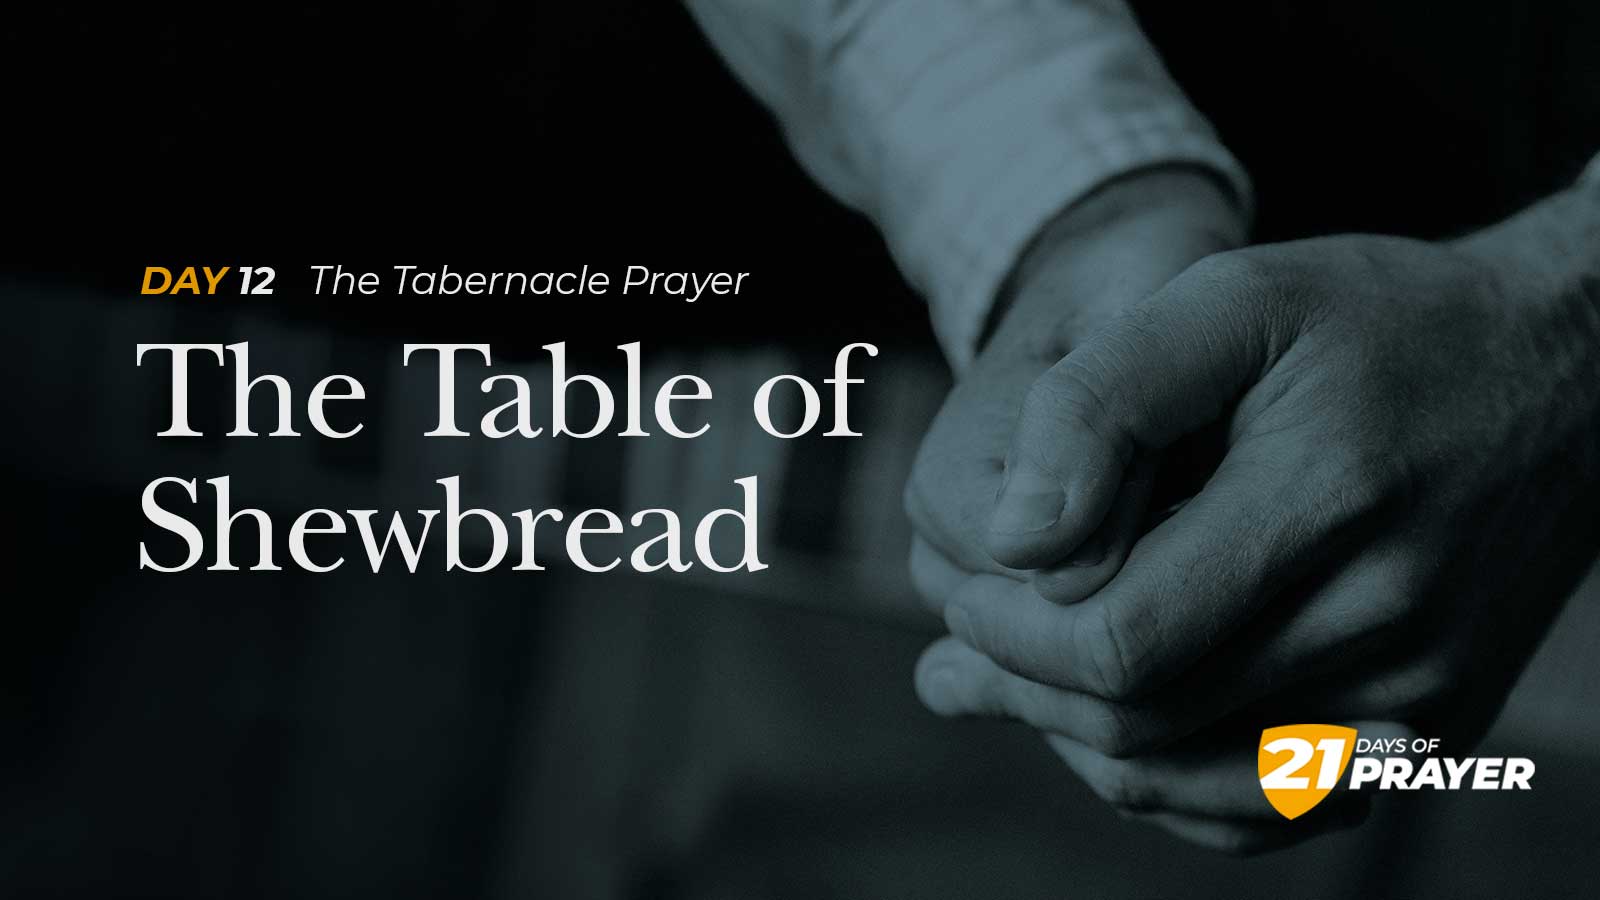 Day 12: THE TABLE OF SHEWBREAD